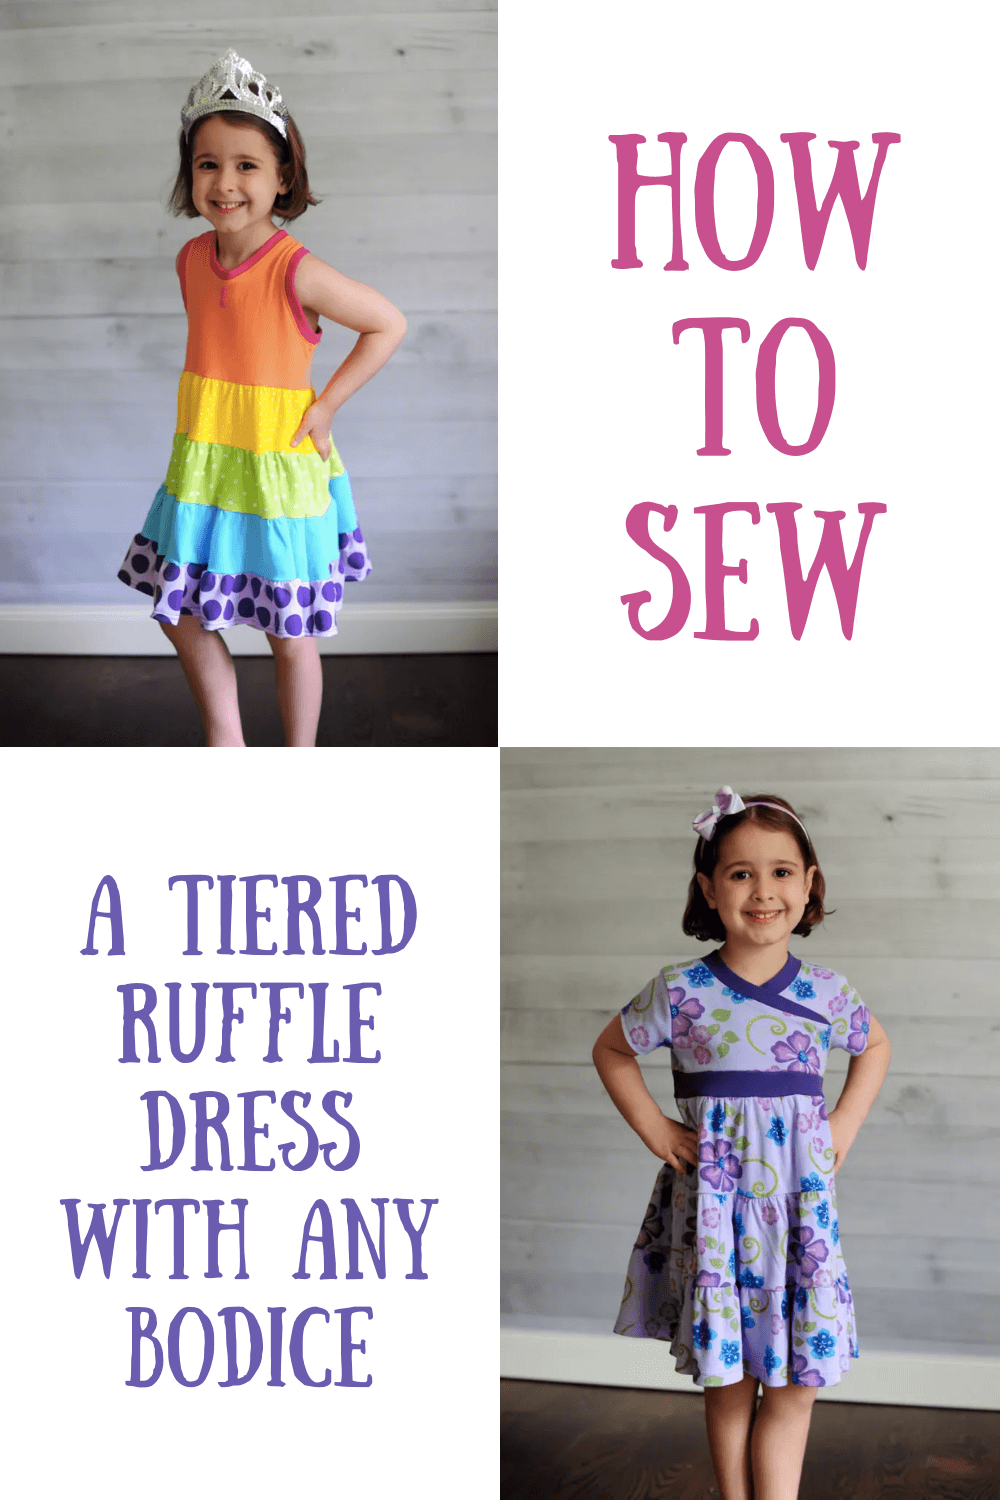 How to Sew a Tiered Ruffle Dress